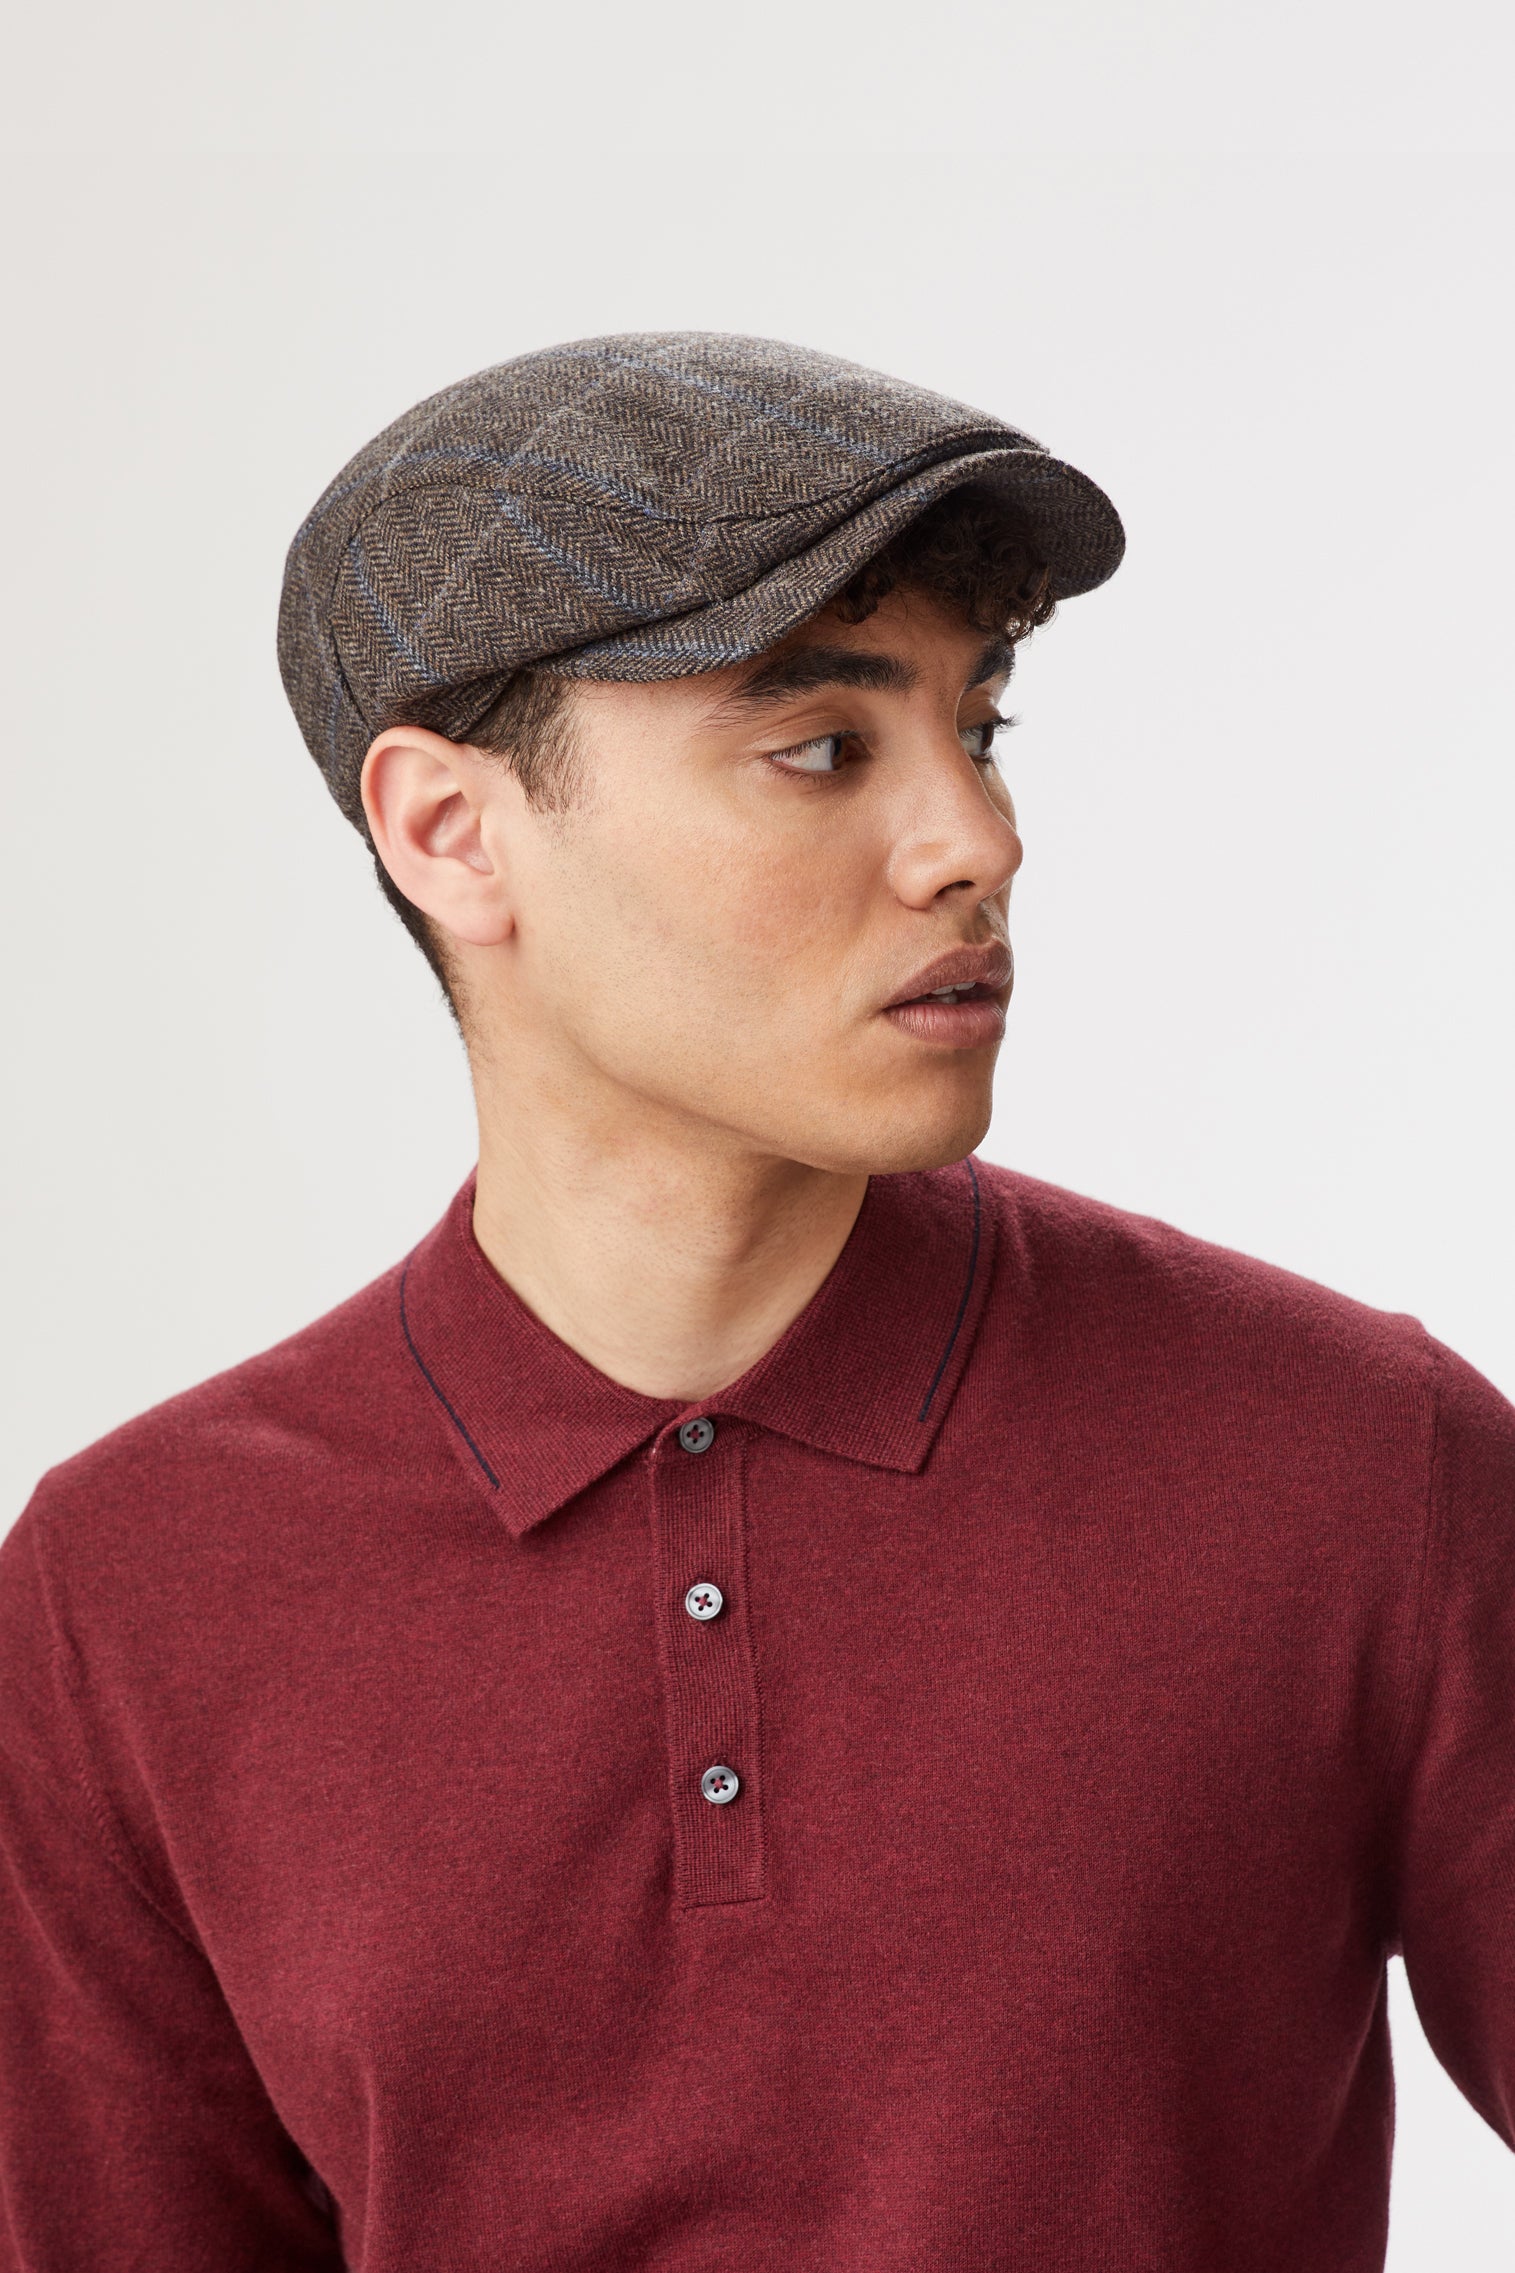 Lynton Brown Flat Cap - Hats for Oval Face Shapes - Lock & Co. Hatters London UK